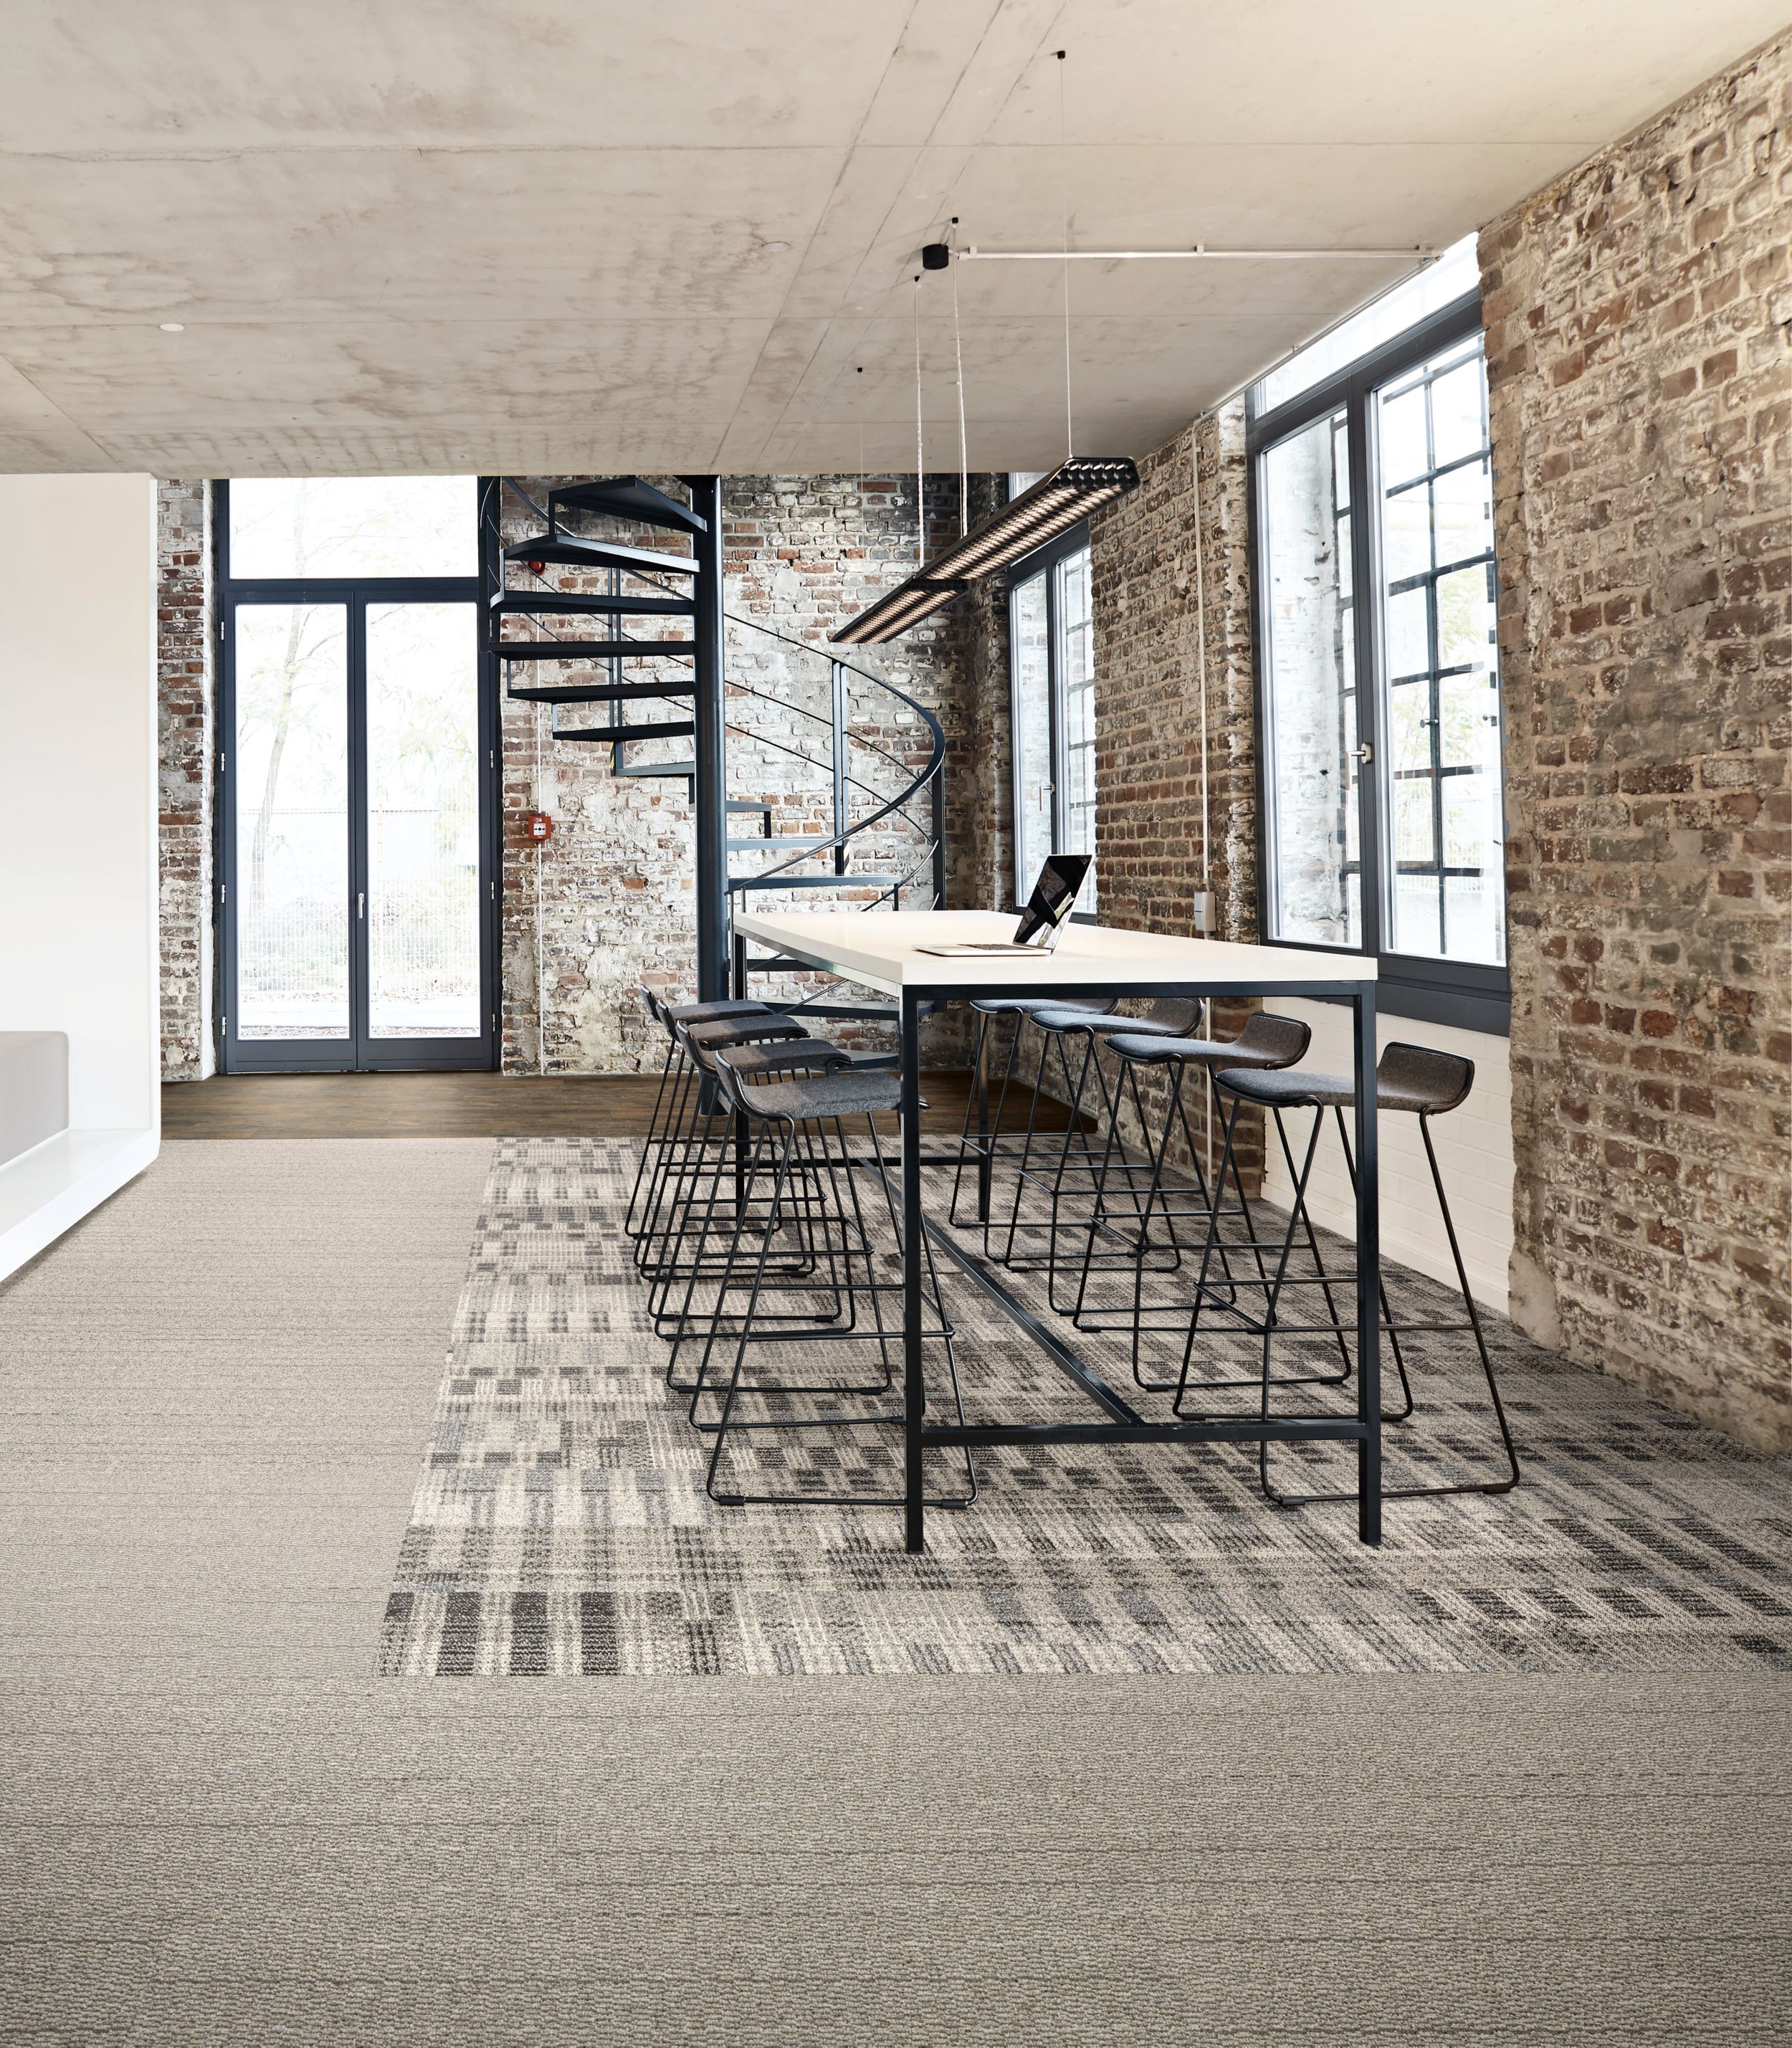 Interface Loom of Life and Tangled & Taut plank carpet tile with Textured Woodgrains LVT in seating area with brick walls and spiral staircase in background imagen número 7